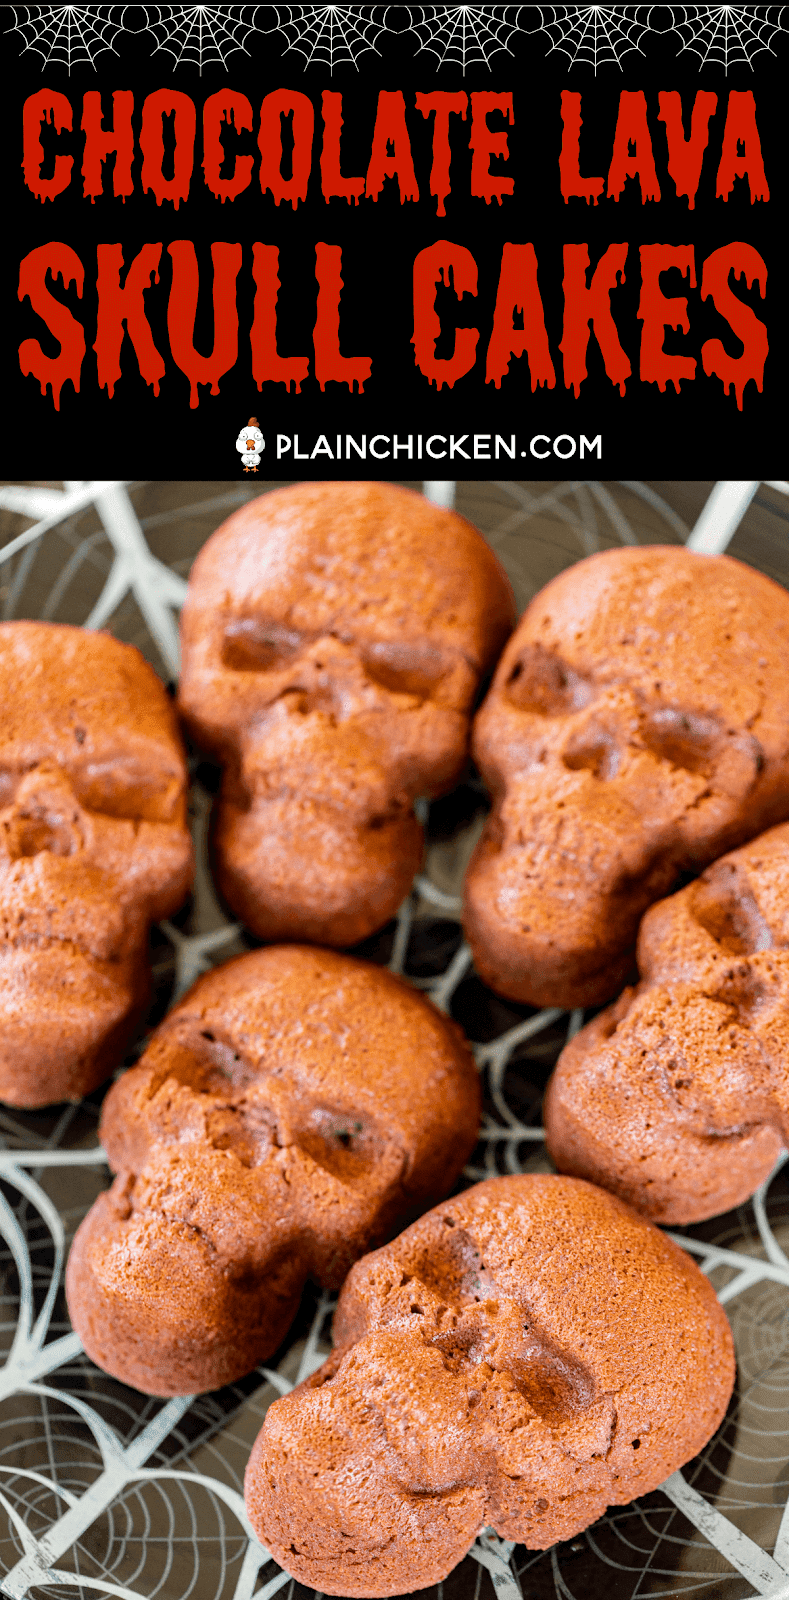 Chocolate Lava Skull Cakes - seriously delicious and PERFECT for your Halloween parties! Only 5 simple ingredients - chocolate chips, butter, eggs, powdered sugar, flour. They only take a minute to whip up and are ready to eat in about 15 minutes. Serve the cakes with some whipped cream and/or vanilla ice cream. Delicious and frightfully festive!! #halloween #chocolate #chocolatelavacake #cake #quickdessert